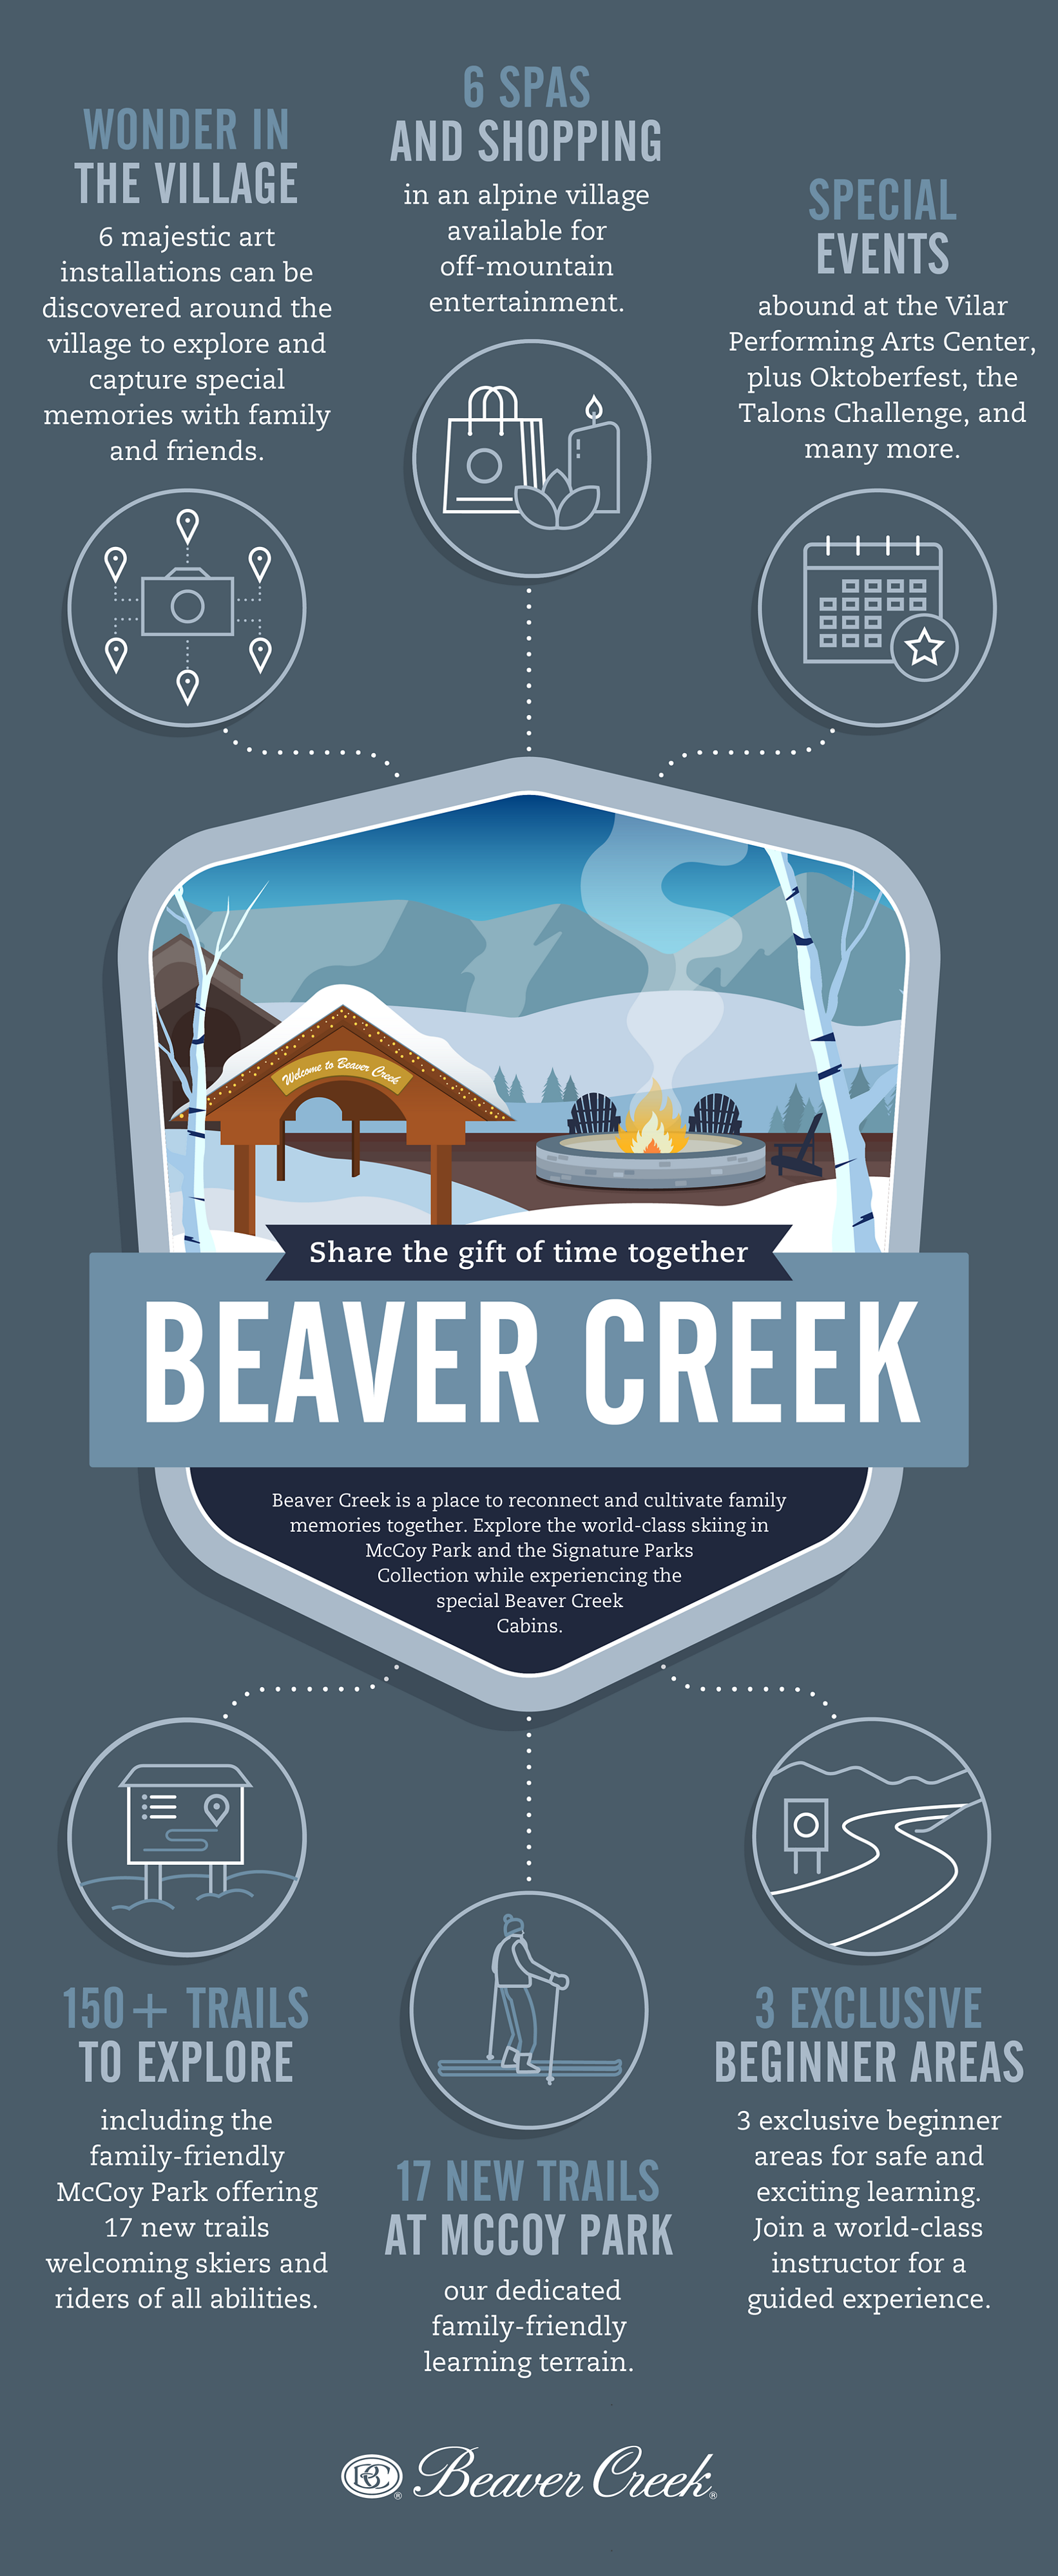 An infographic of Beaver Creek facts, including: 6 Art installations, 6 spas and shopping, 150 trails to explore, and 14 high-end fine dining options.